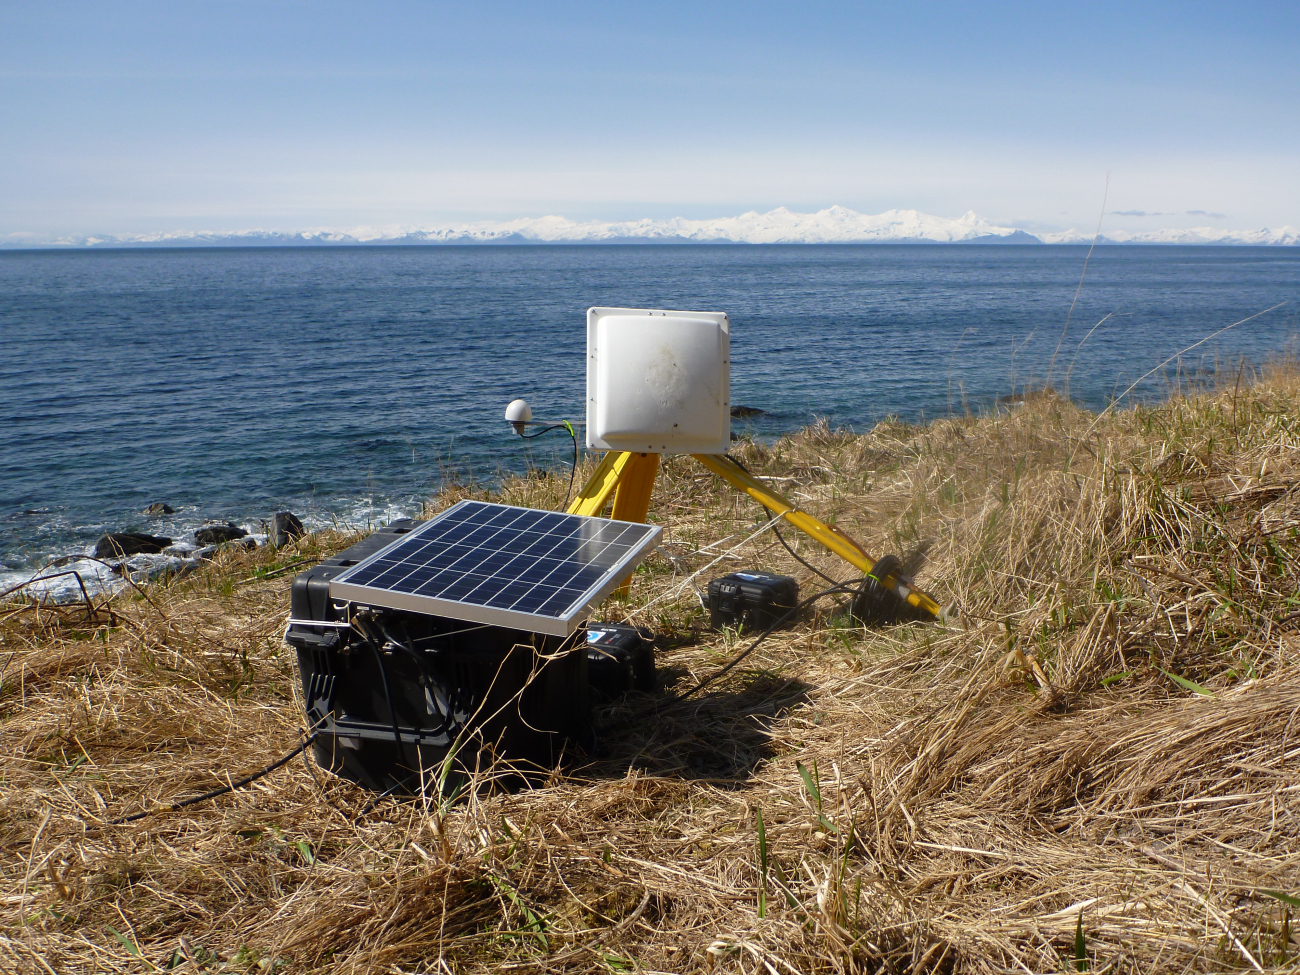 GOES satellite antenna and solar panel used in transmitting tidal data tosatellite and thence to processing center